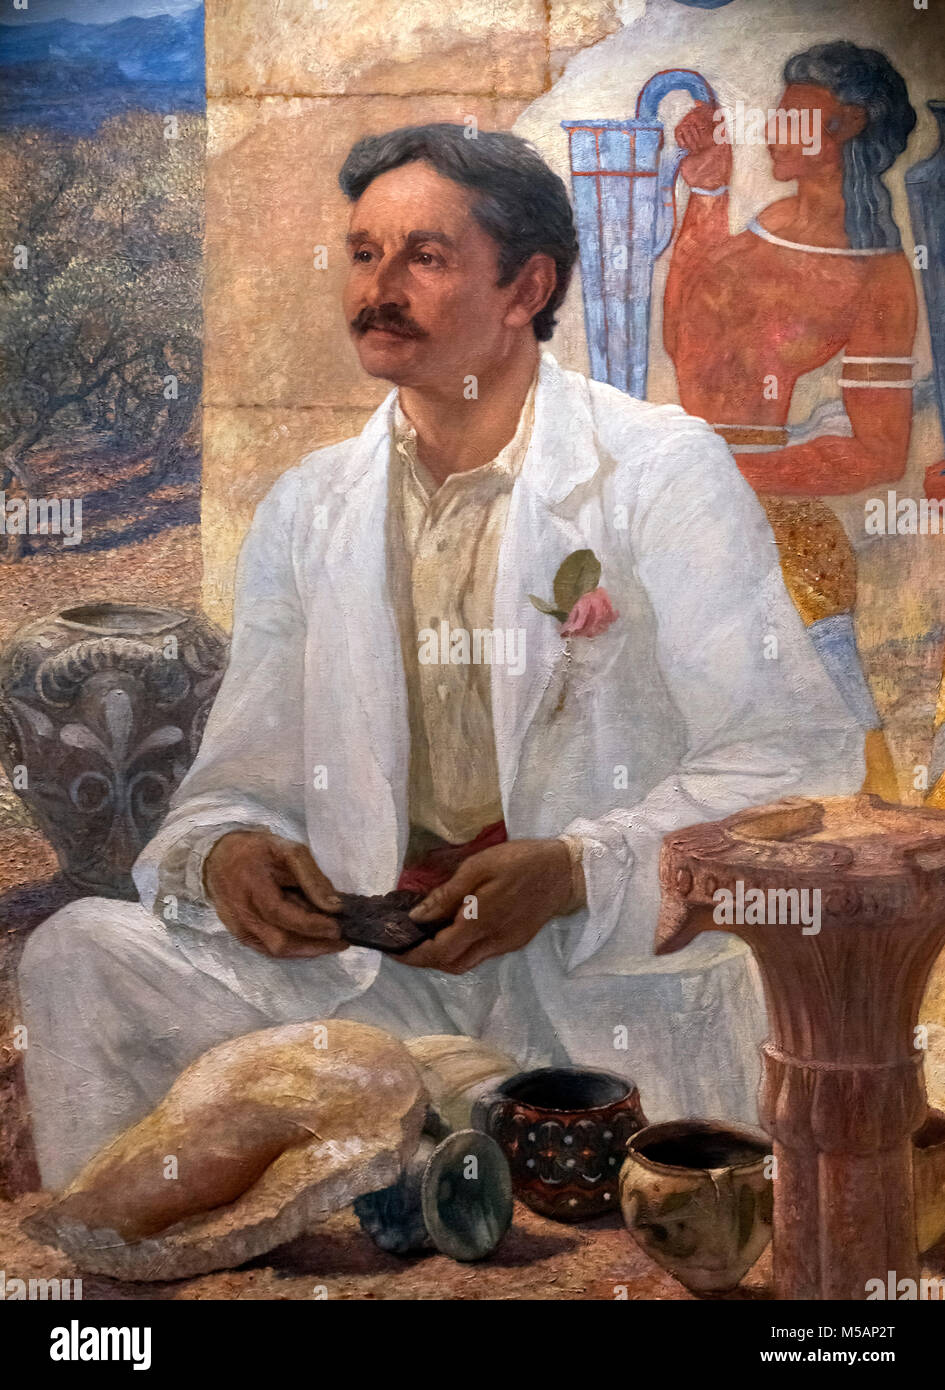 Sir Arthur Evans (1851-1941), portrait by Sir William Richmond, oil on canvas, 1907. Arthur Evans is most famous for his controversial excavations at the Palace of Knossos in Crete. Stock Photo